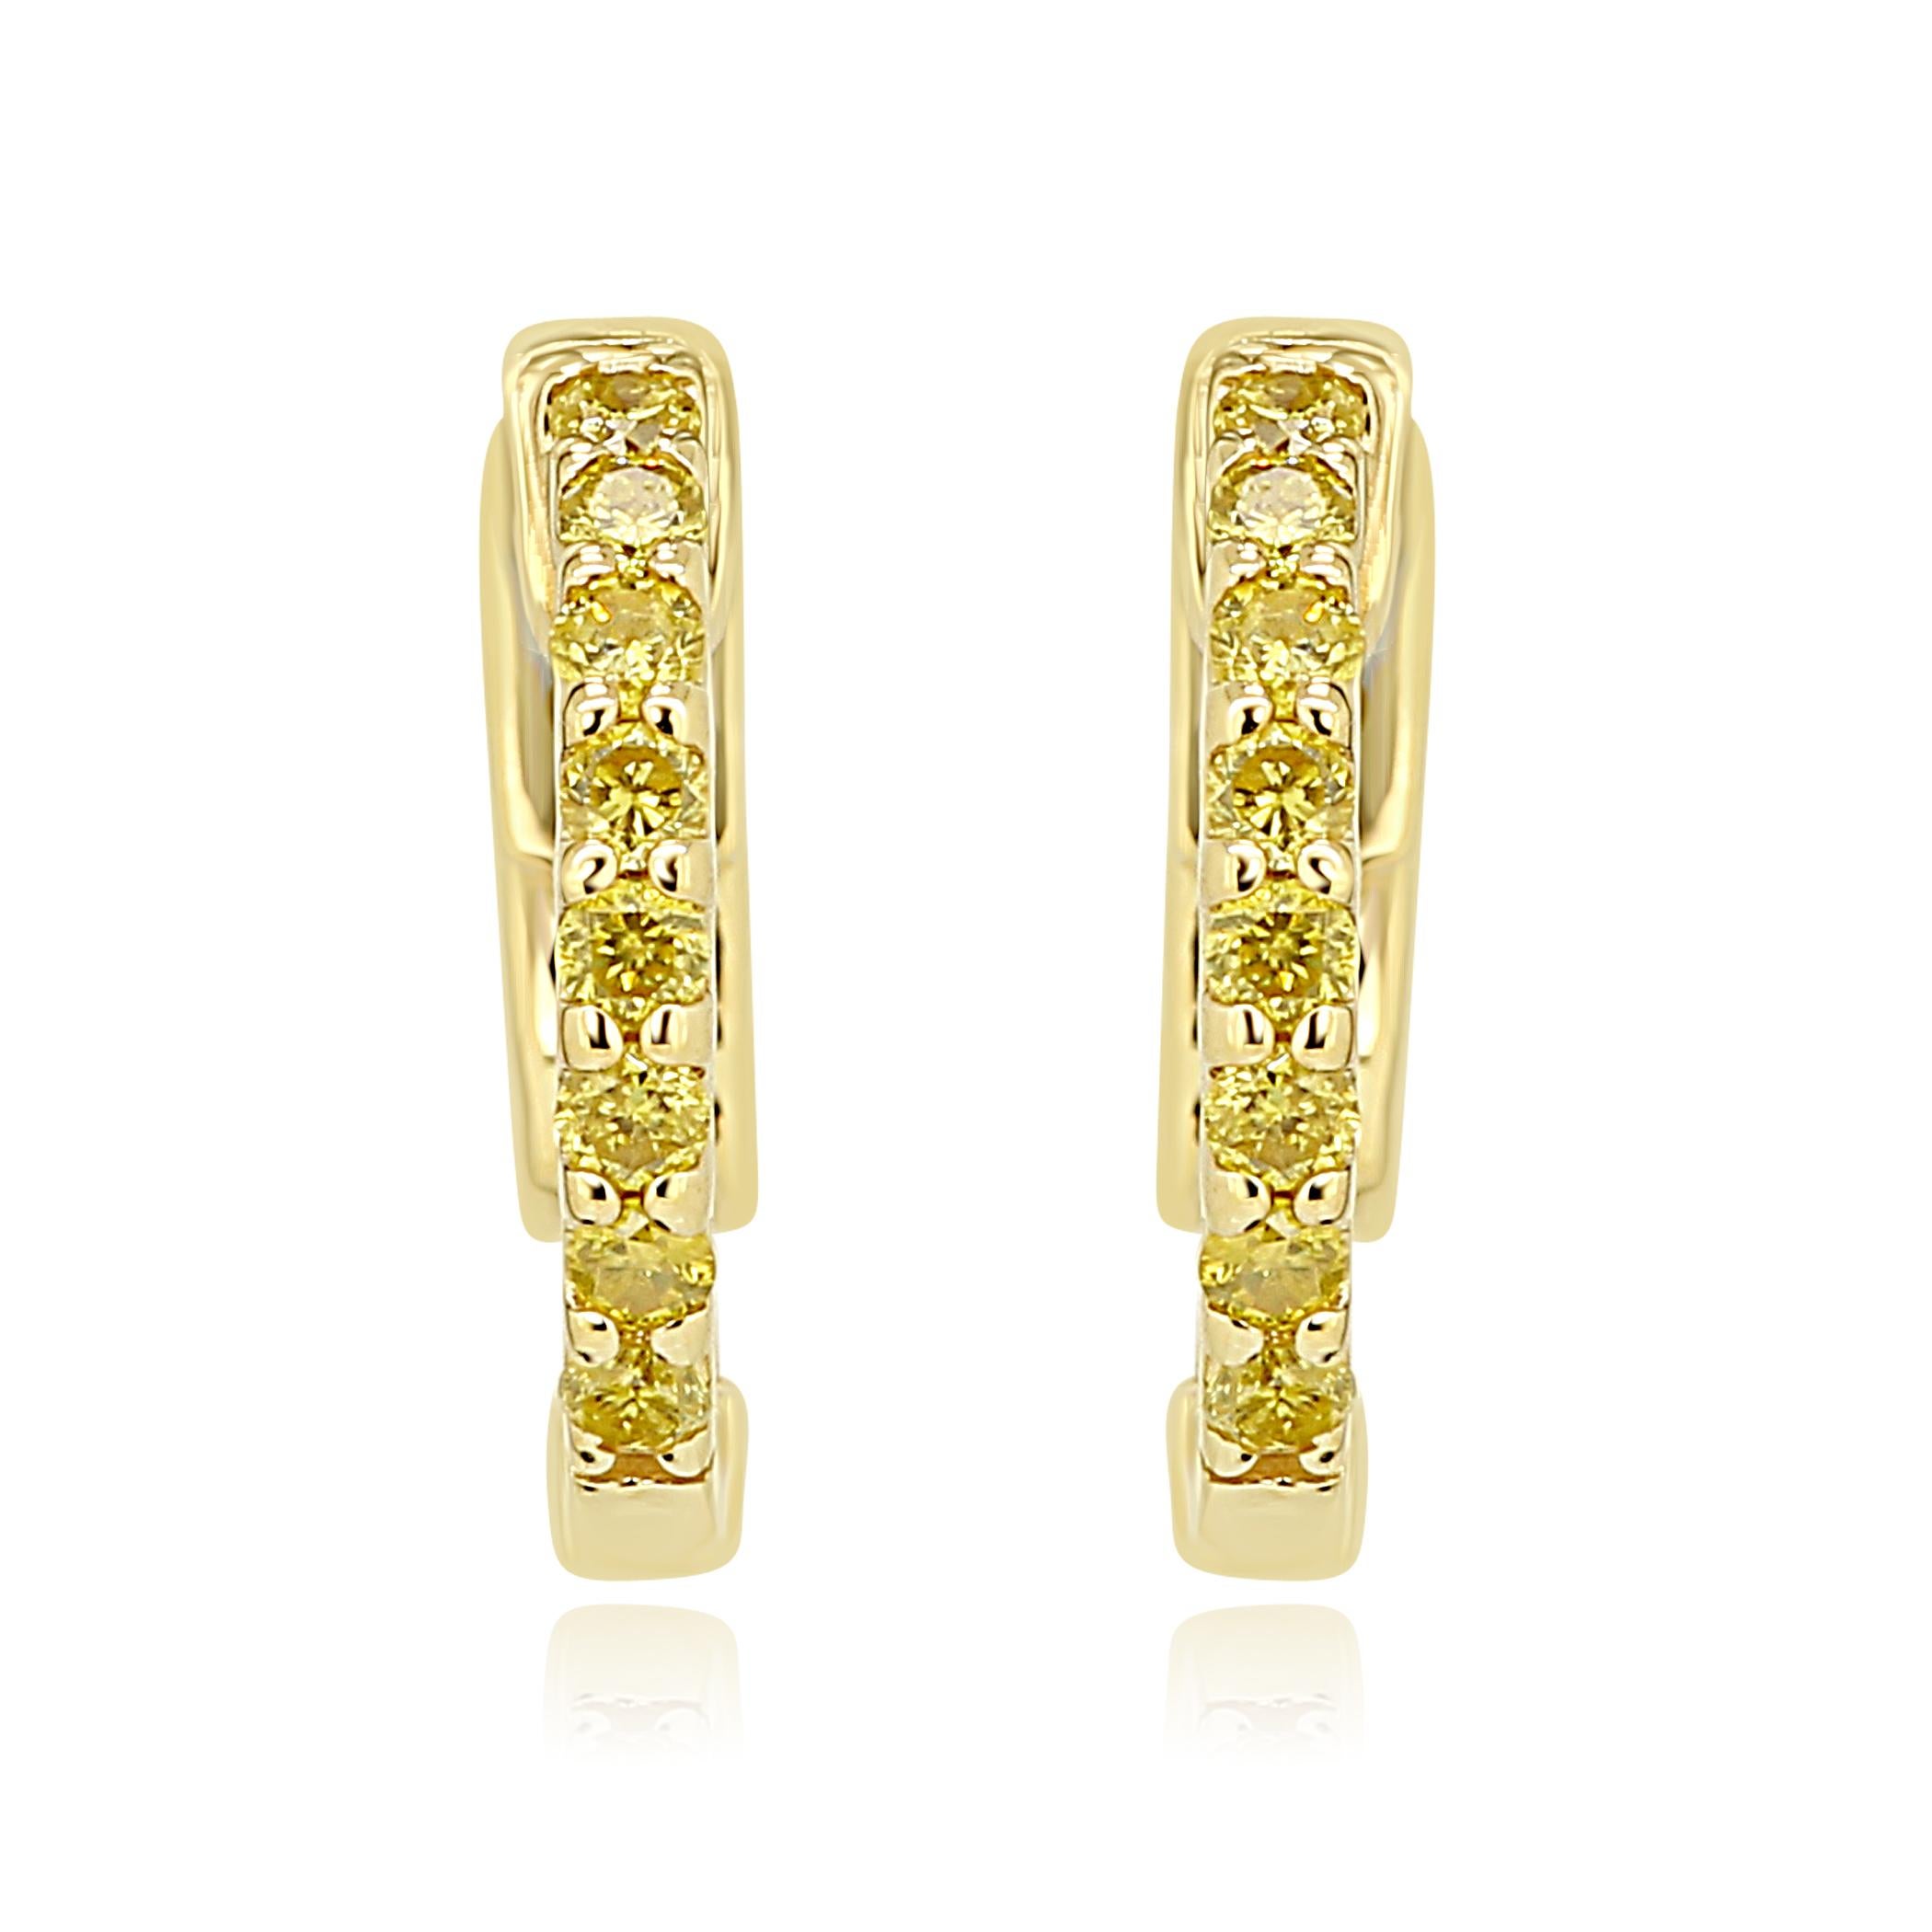 Stunning Natural Fancy Yellow VS-SI Diamond Round 0.30 Carat set in 14K Yellow Gold Fashion Hoop Dangle Drop  Everyday Wear Earring.

Style available in different price ranges. Prices are based on your selection of 4C's i.e Cut, Color, Carat,